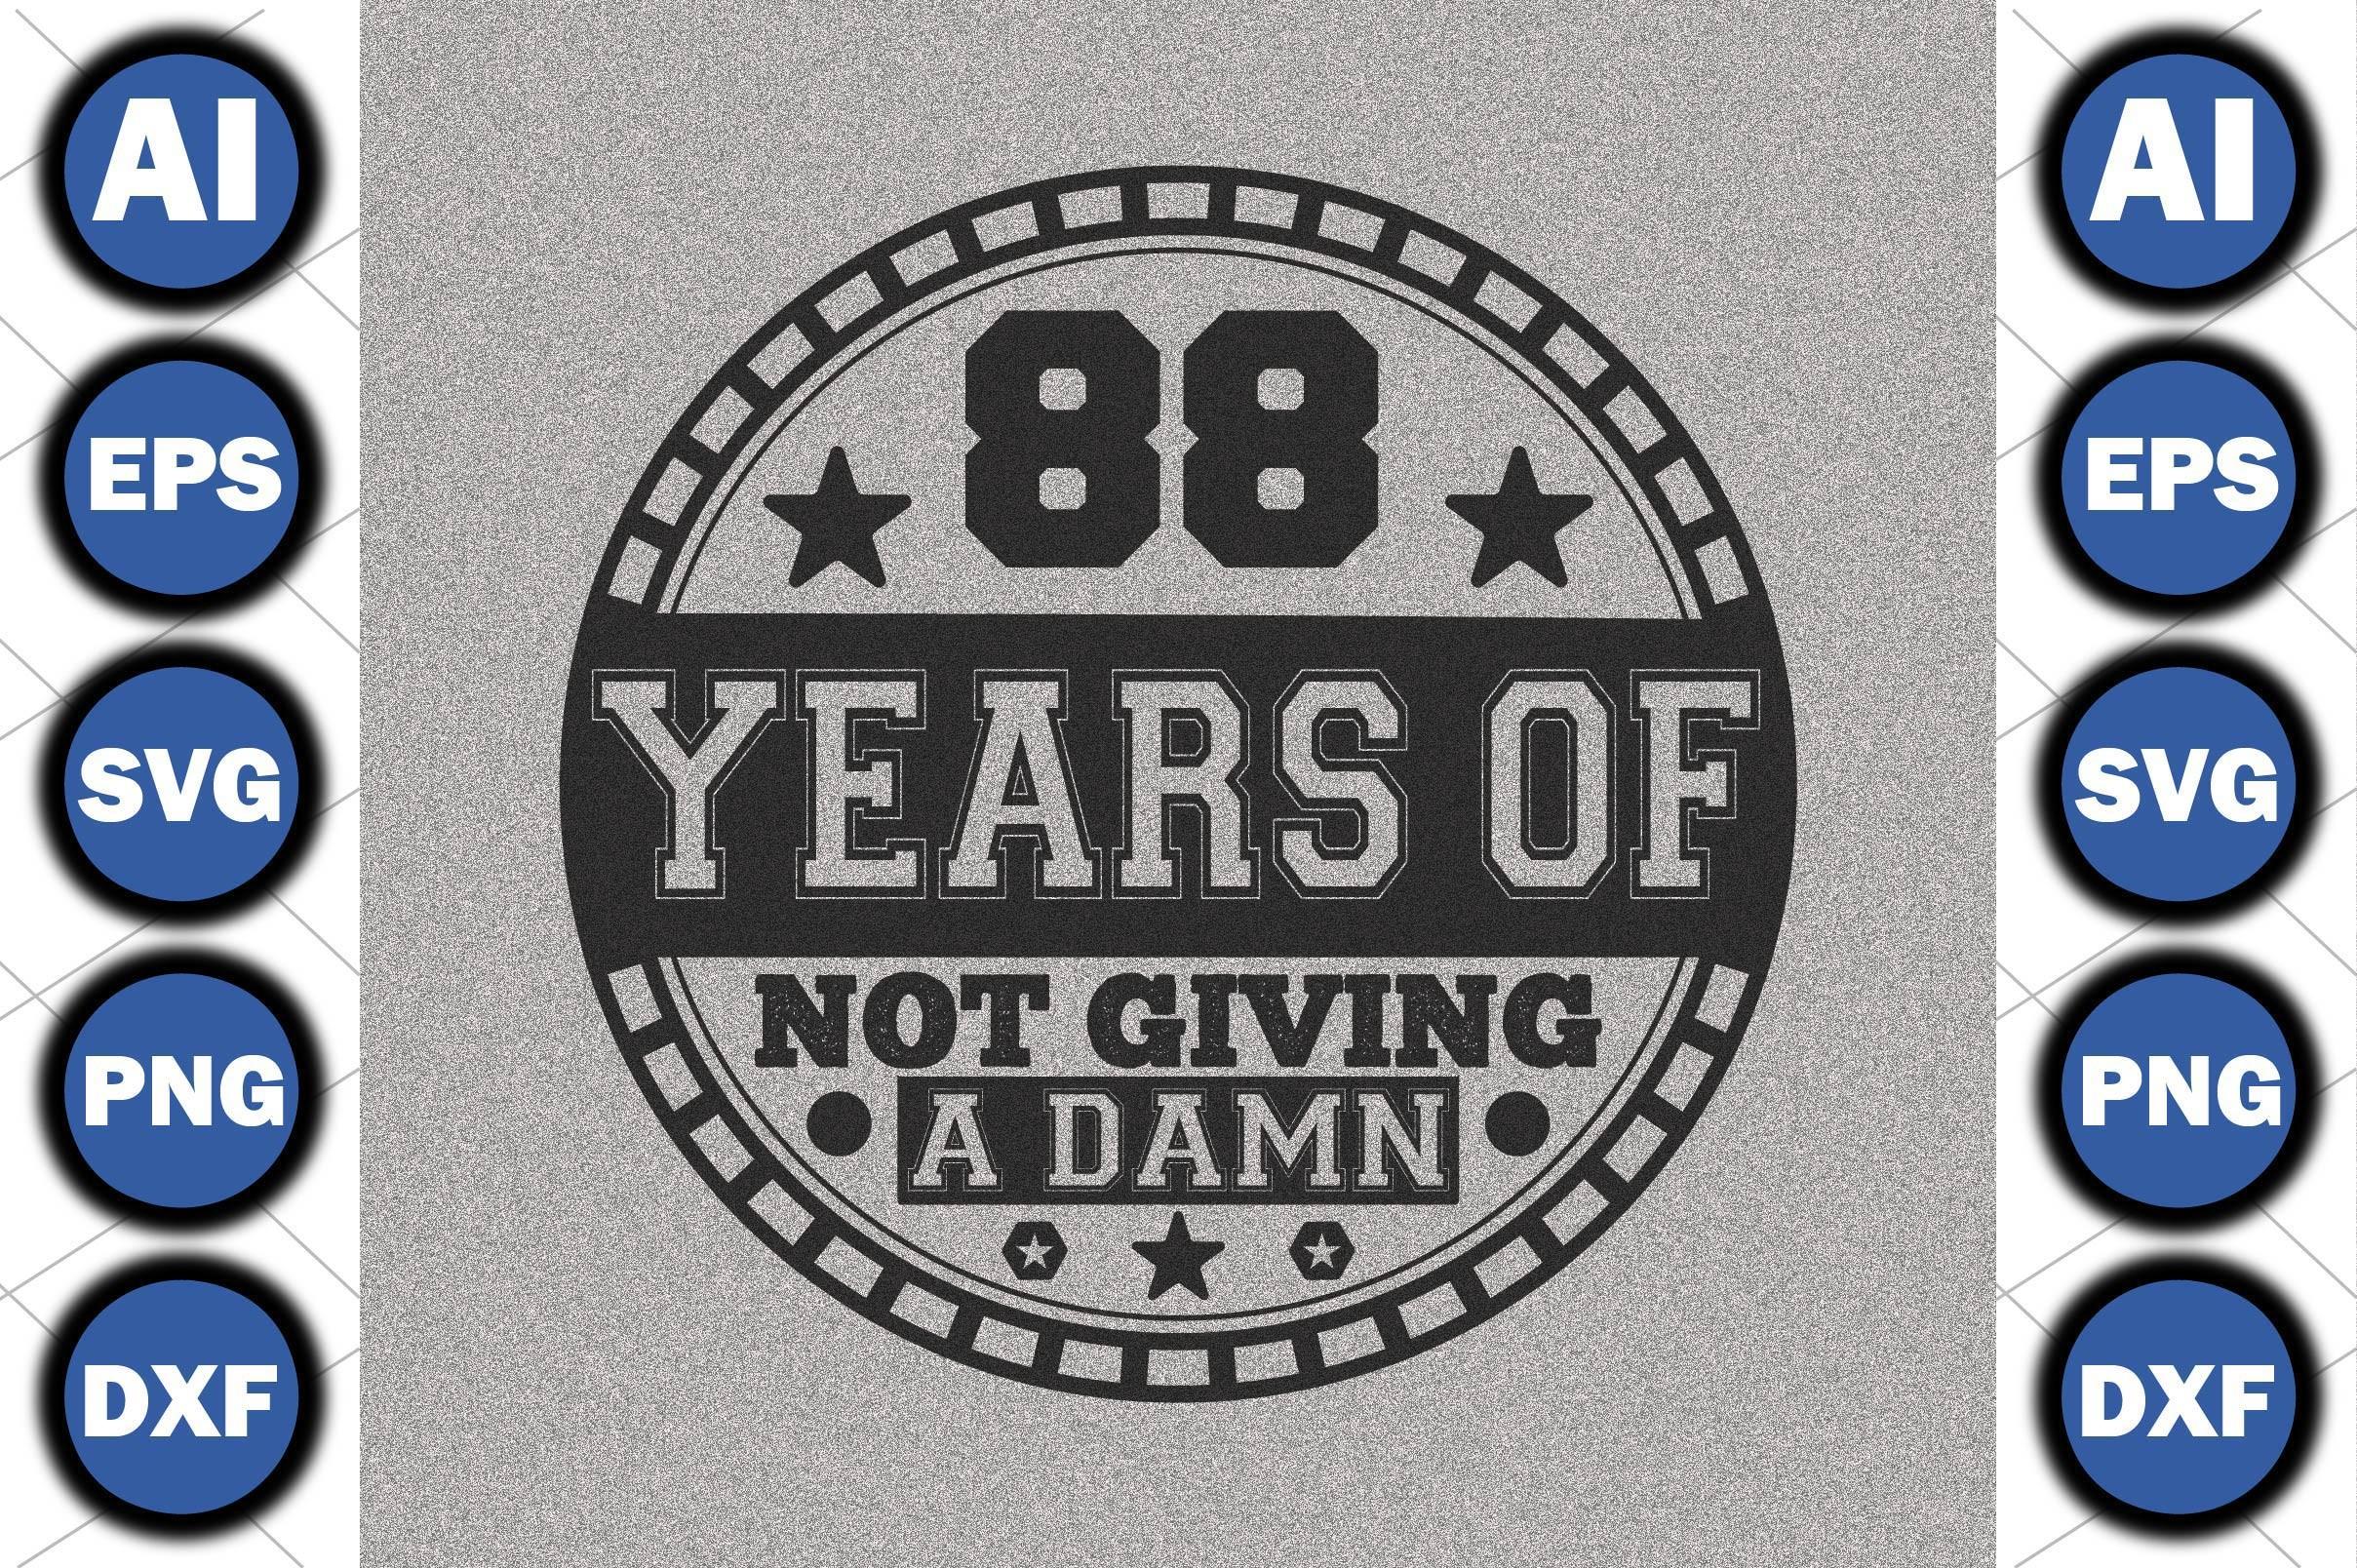 88 Years of Not Giving a Damn